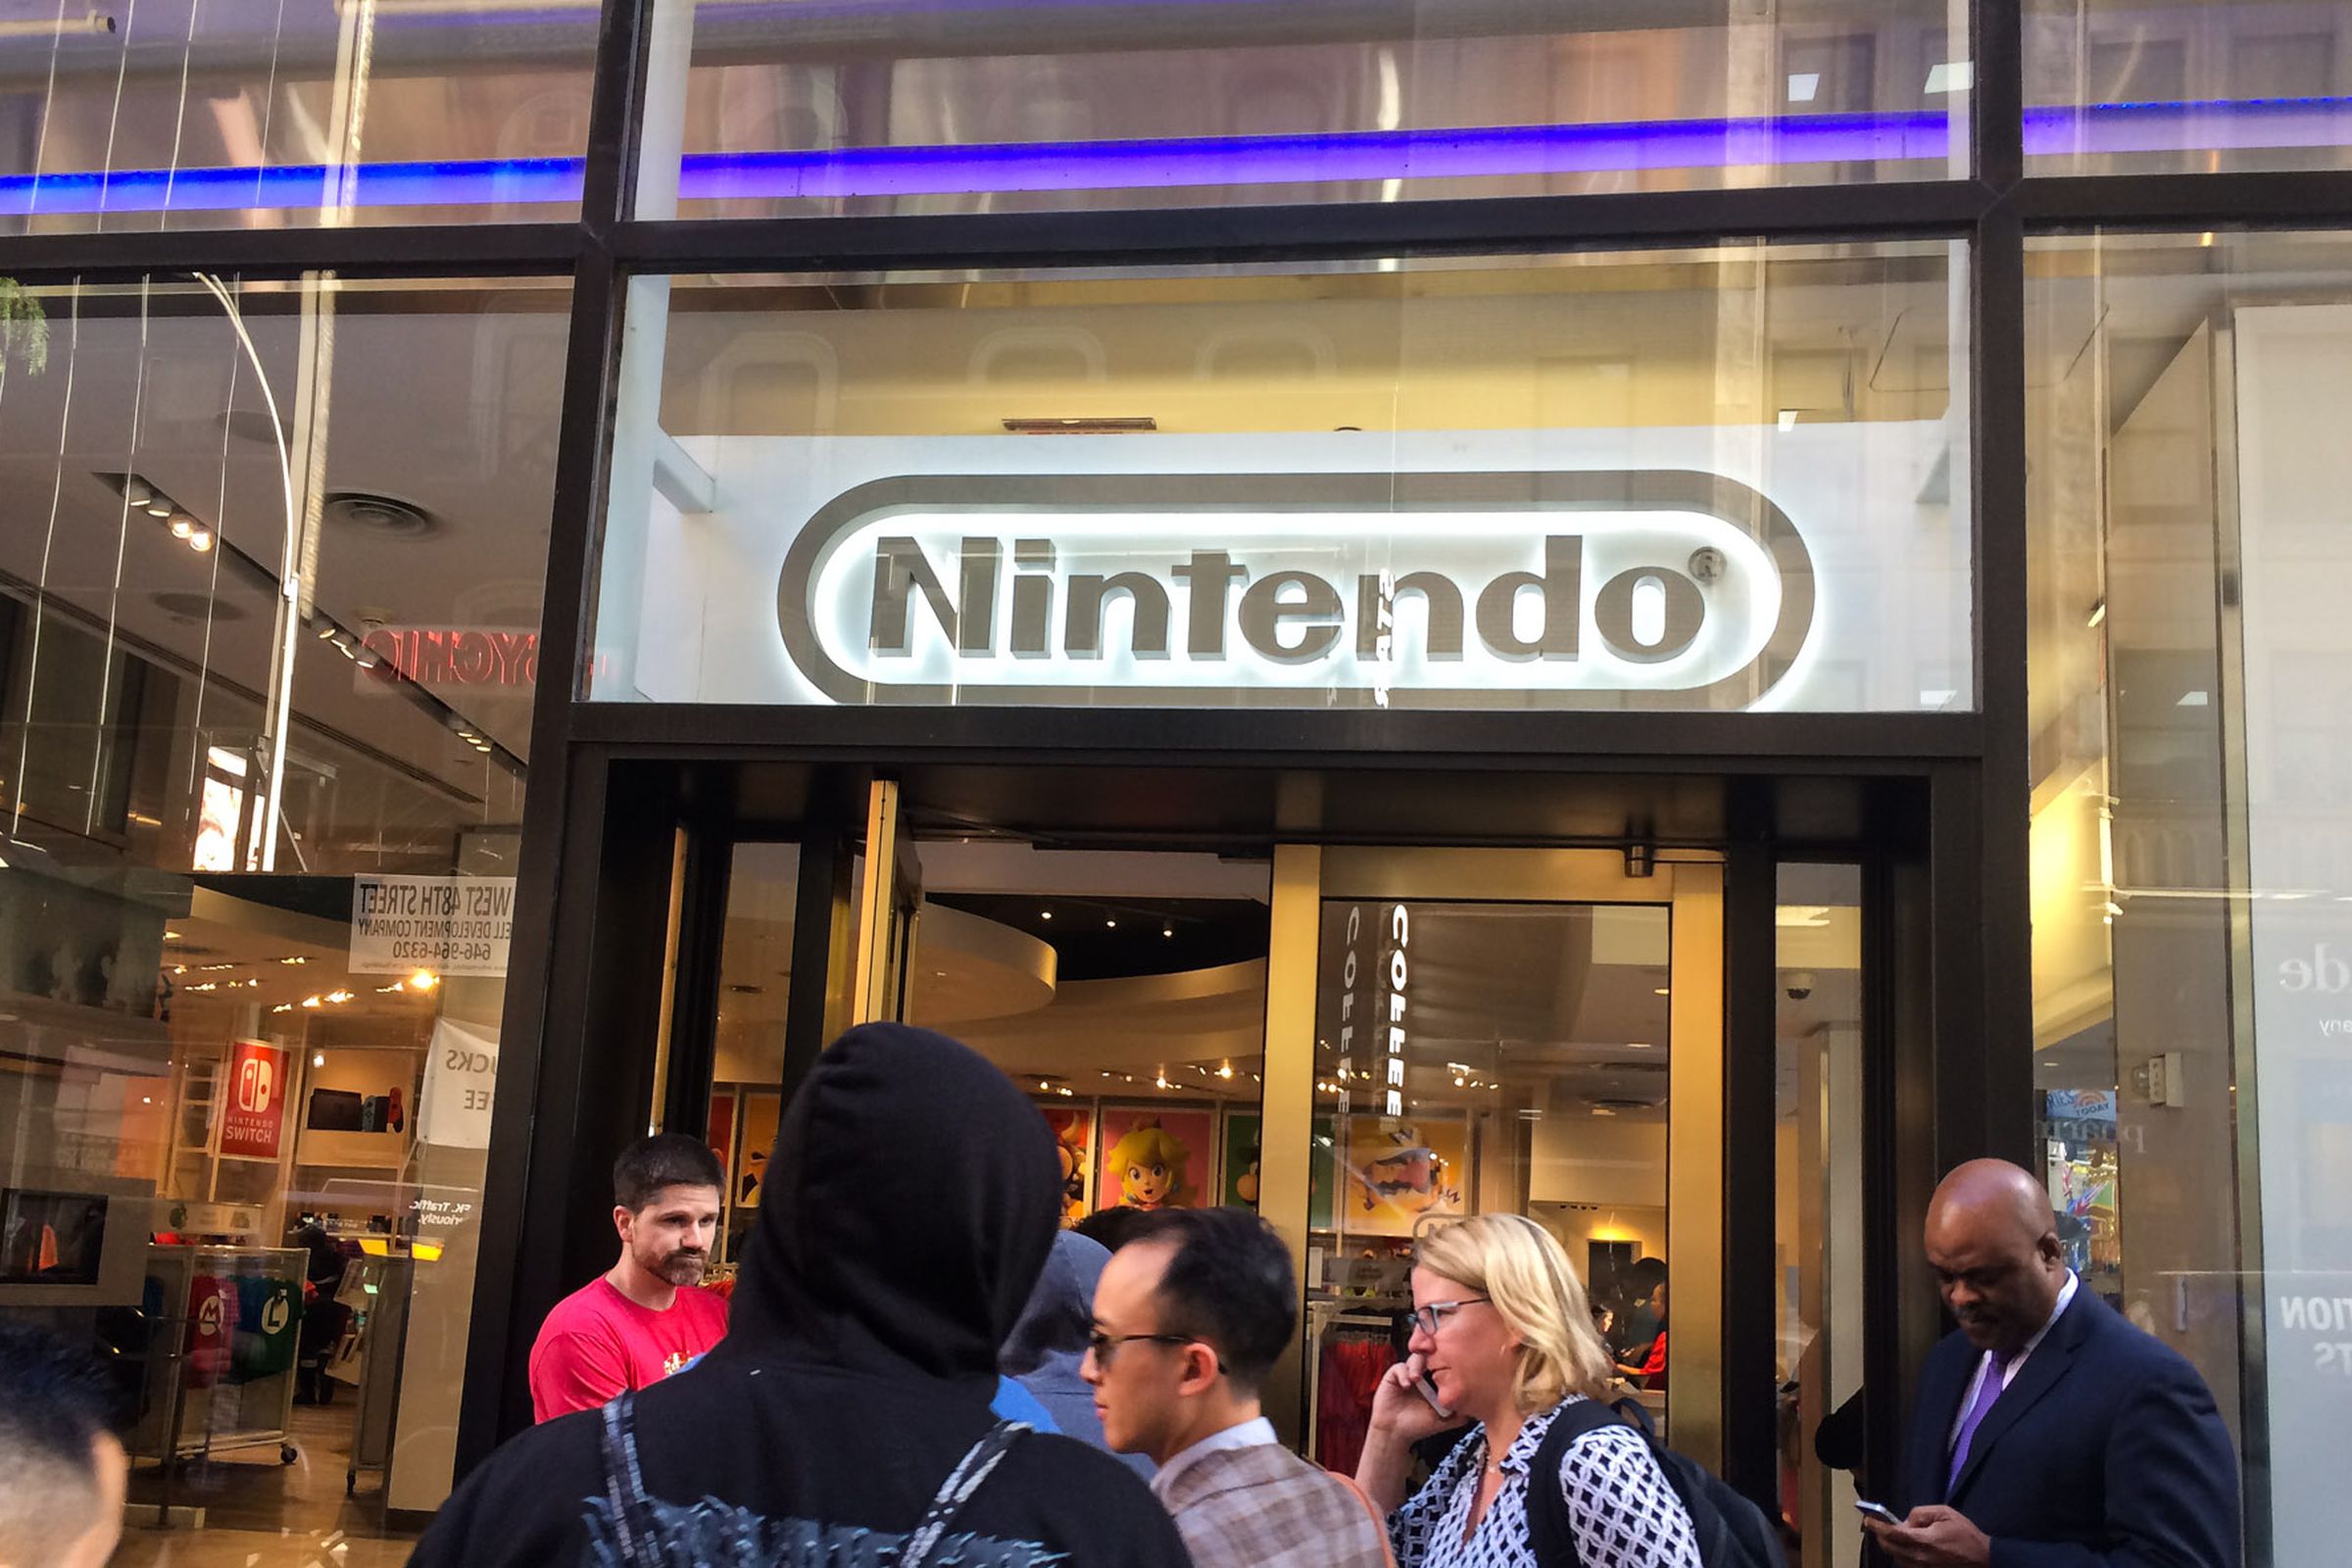 A photo showing the entrance to the Nintendo store in NYC